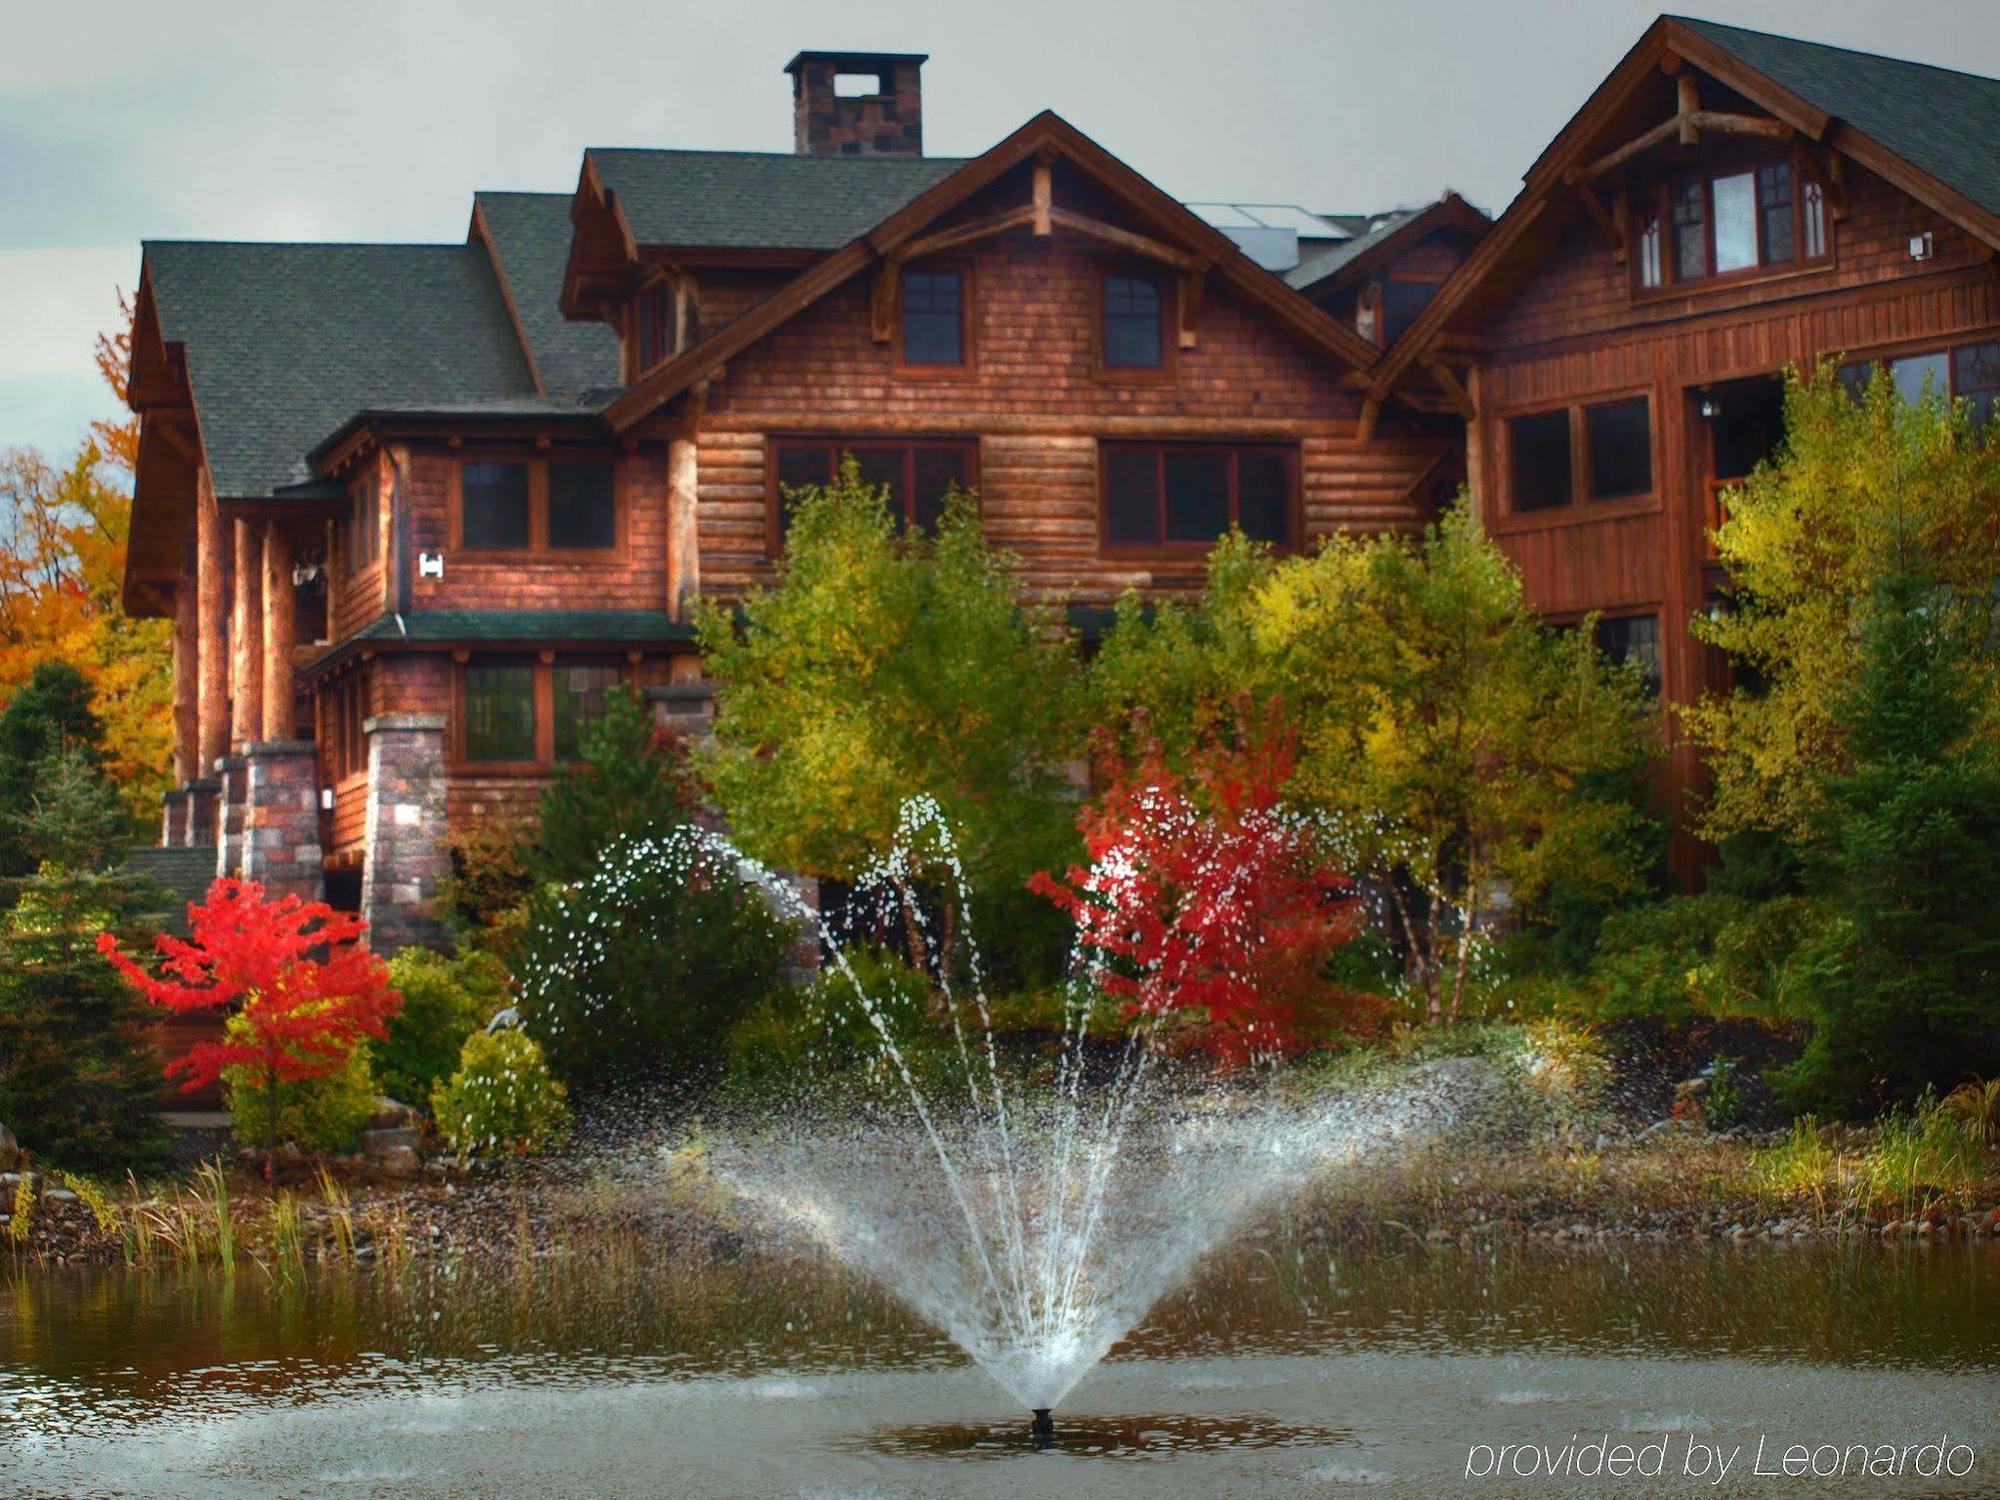 The Whiteface Lodge Lake Placid Exterior foto